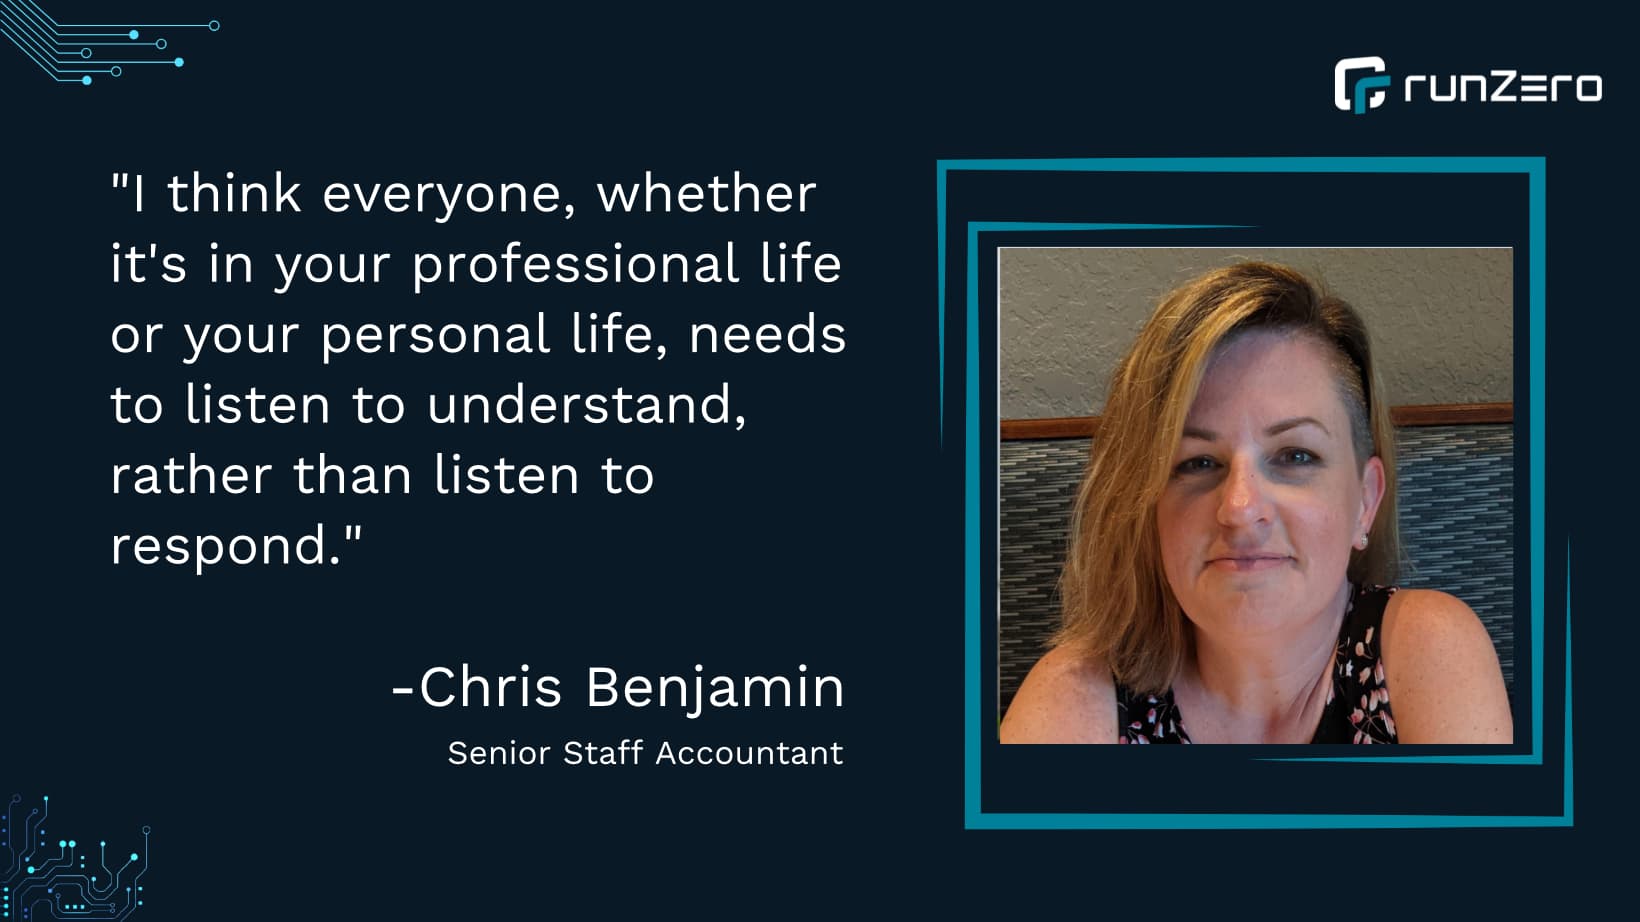 "I think everyone, whether it's in your professional life or your personal life, needs to listen to understand, rather than listen to respond."